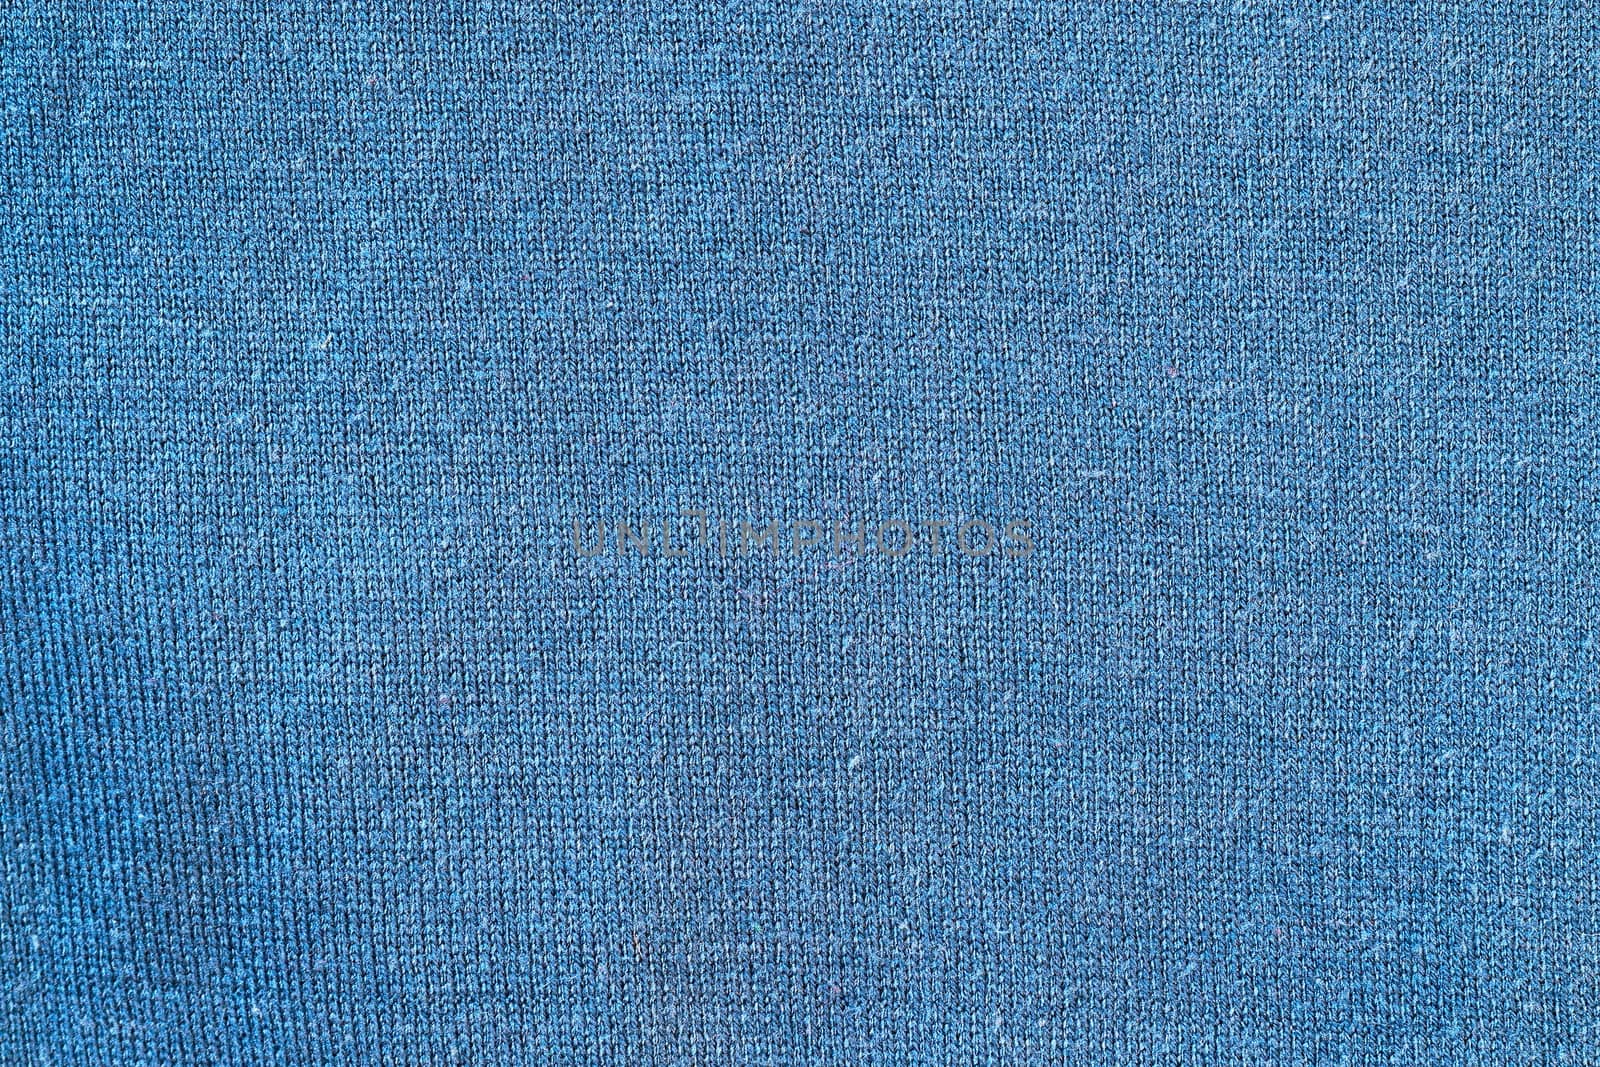 blue crocheted texture ready for your design